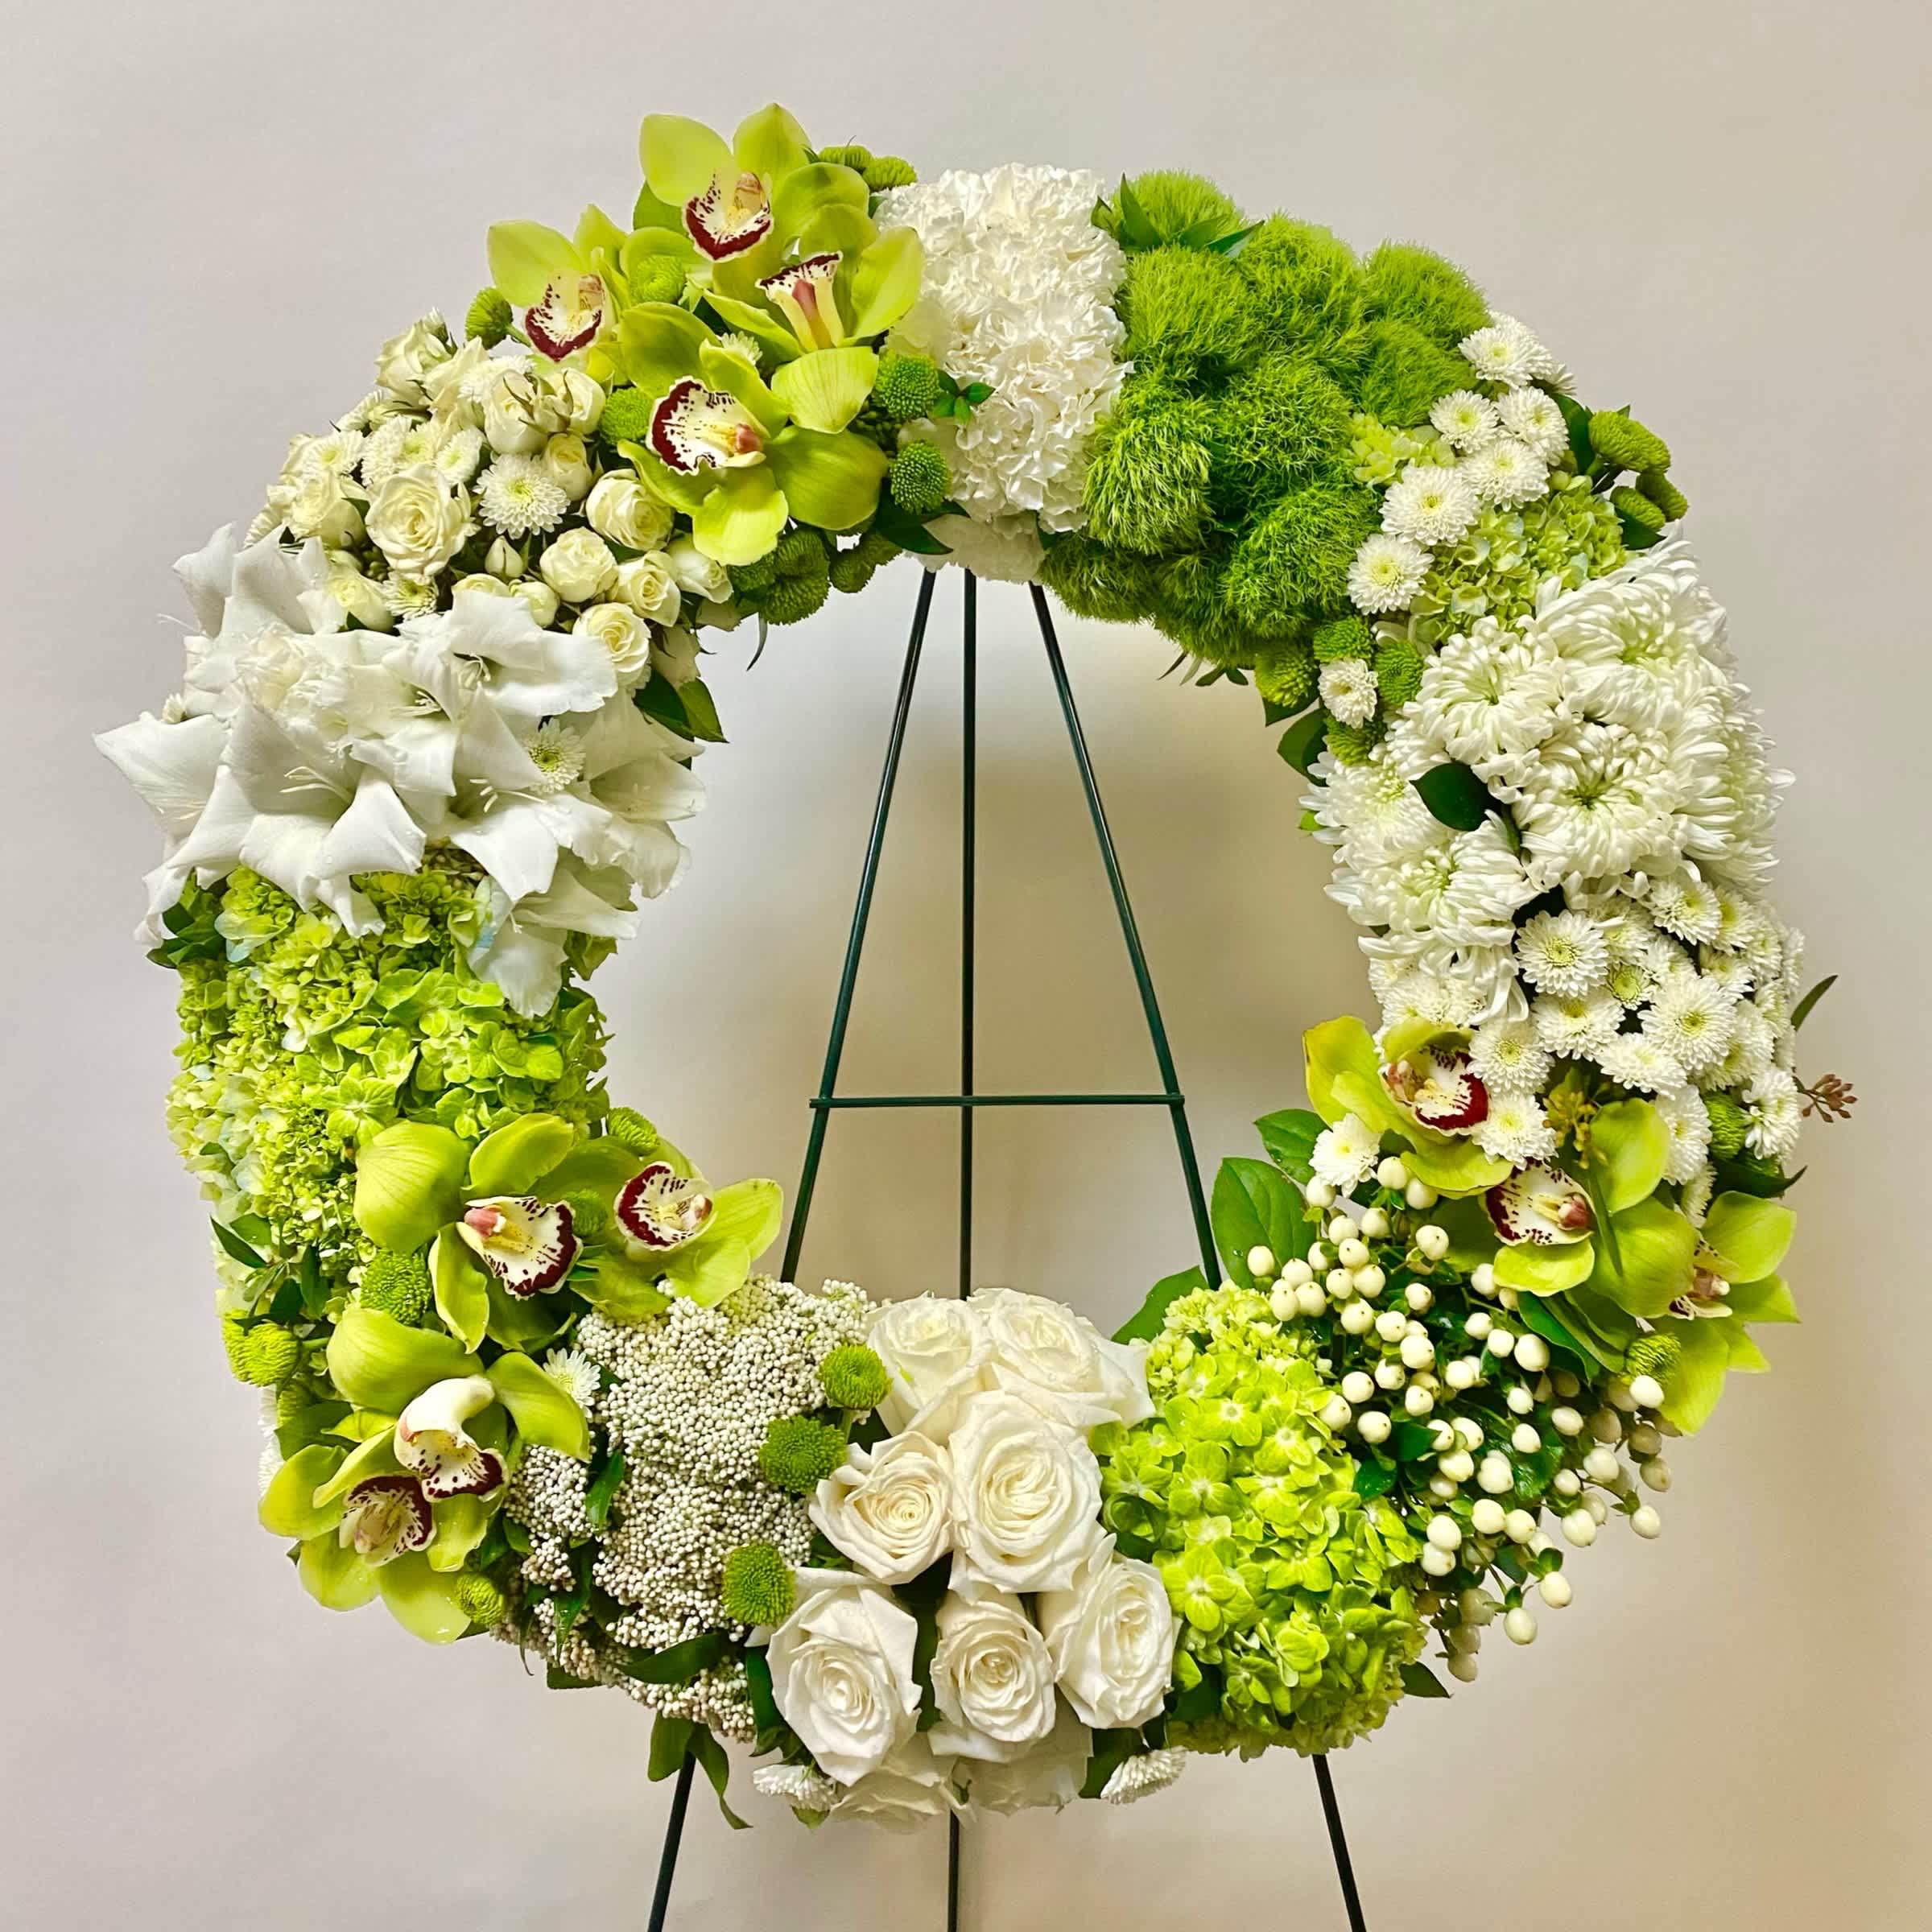 Eternal Affection Wreath - This All and Green Wreath Includes Green Cymbidium Orchids, Green Tricks, White Roses, White Spray Roses, Green Hydrangea, White Fuji Mum, White Carnations and Green Buttons. Or as Similar as Possible based on Availability.